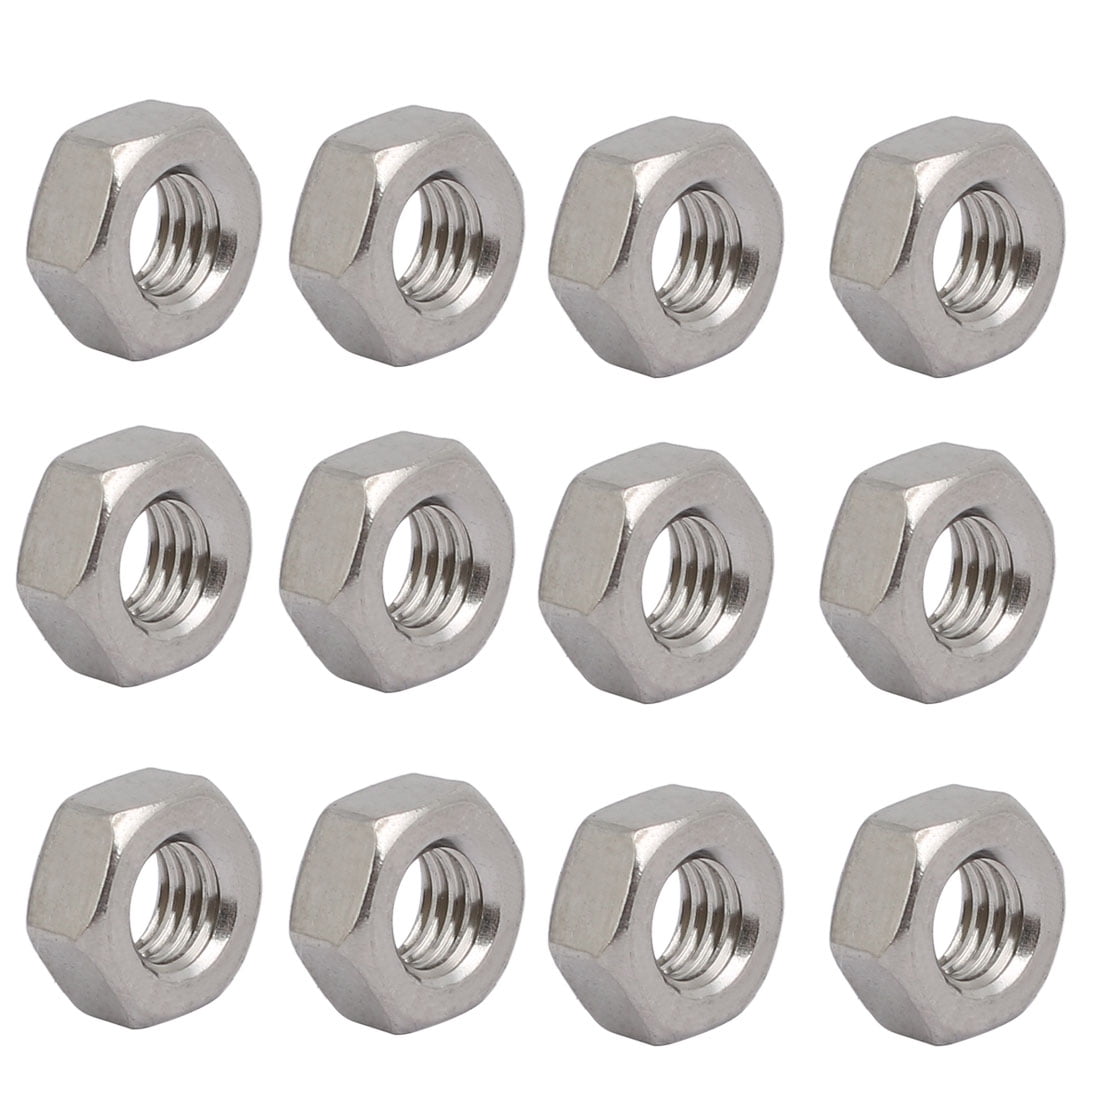 12pcs M6 x 1mm Pitch Metric Thread 304 Stainless Steel Left Hand Hex Nuts 